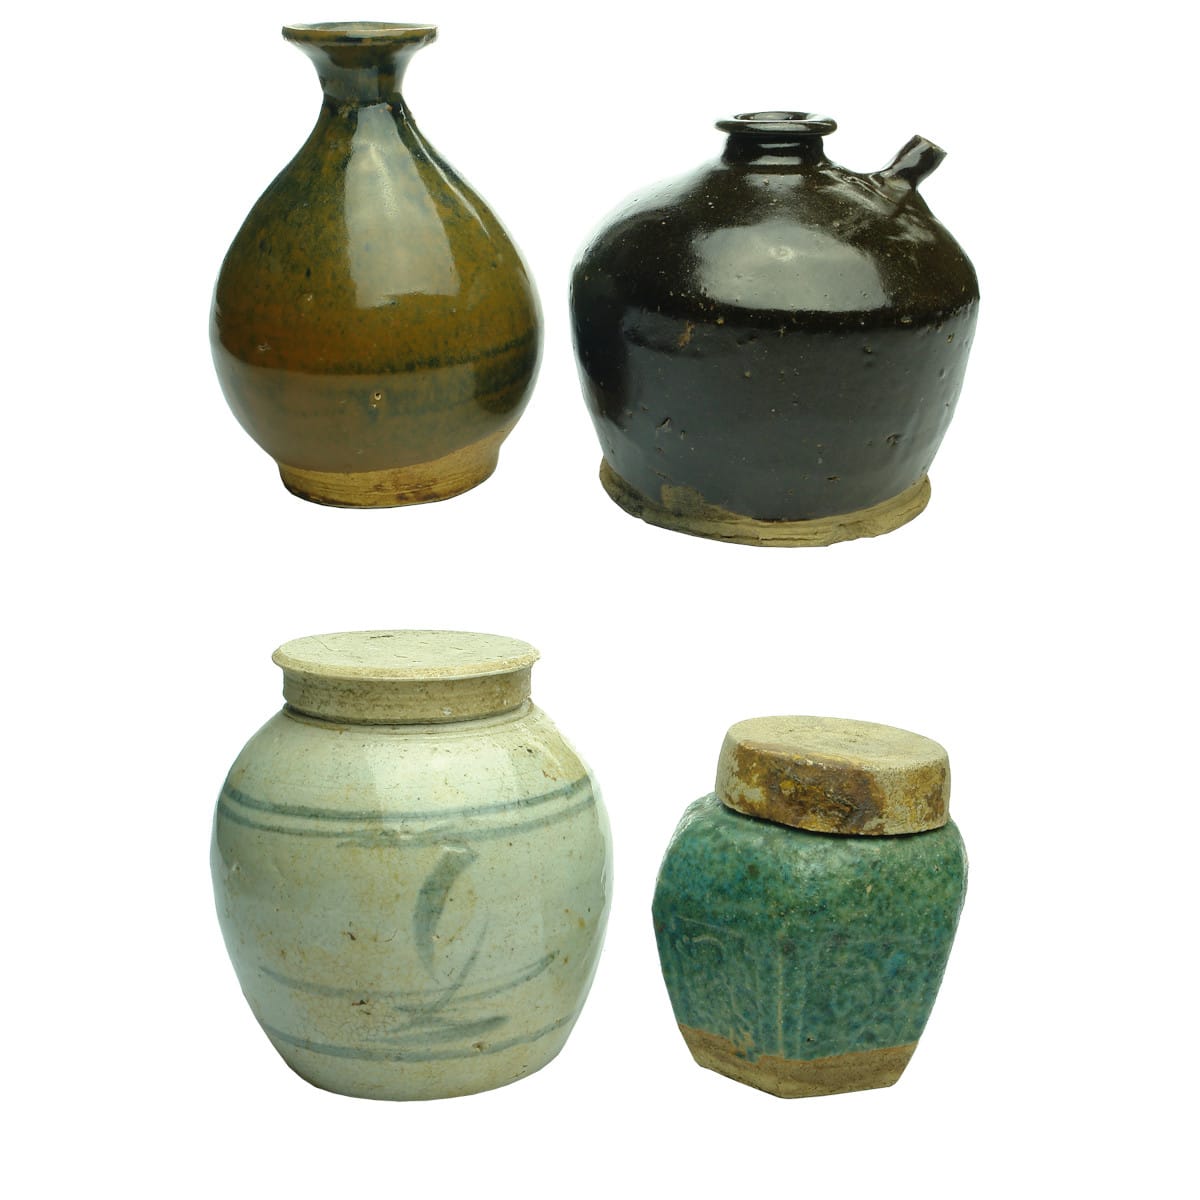 4 Chinese Pieces. Tiger Whisky; Soy Sauce; Round grey ginger jar; Hexagonal Green Ginger Jar.